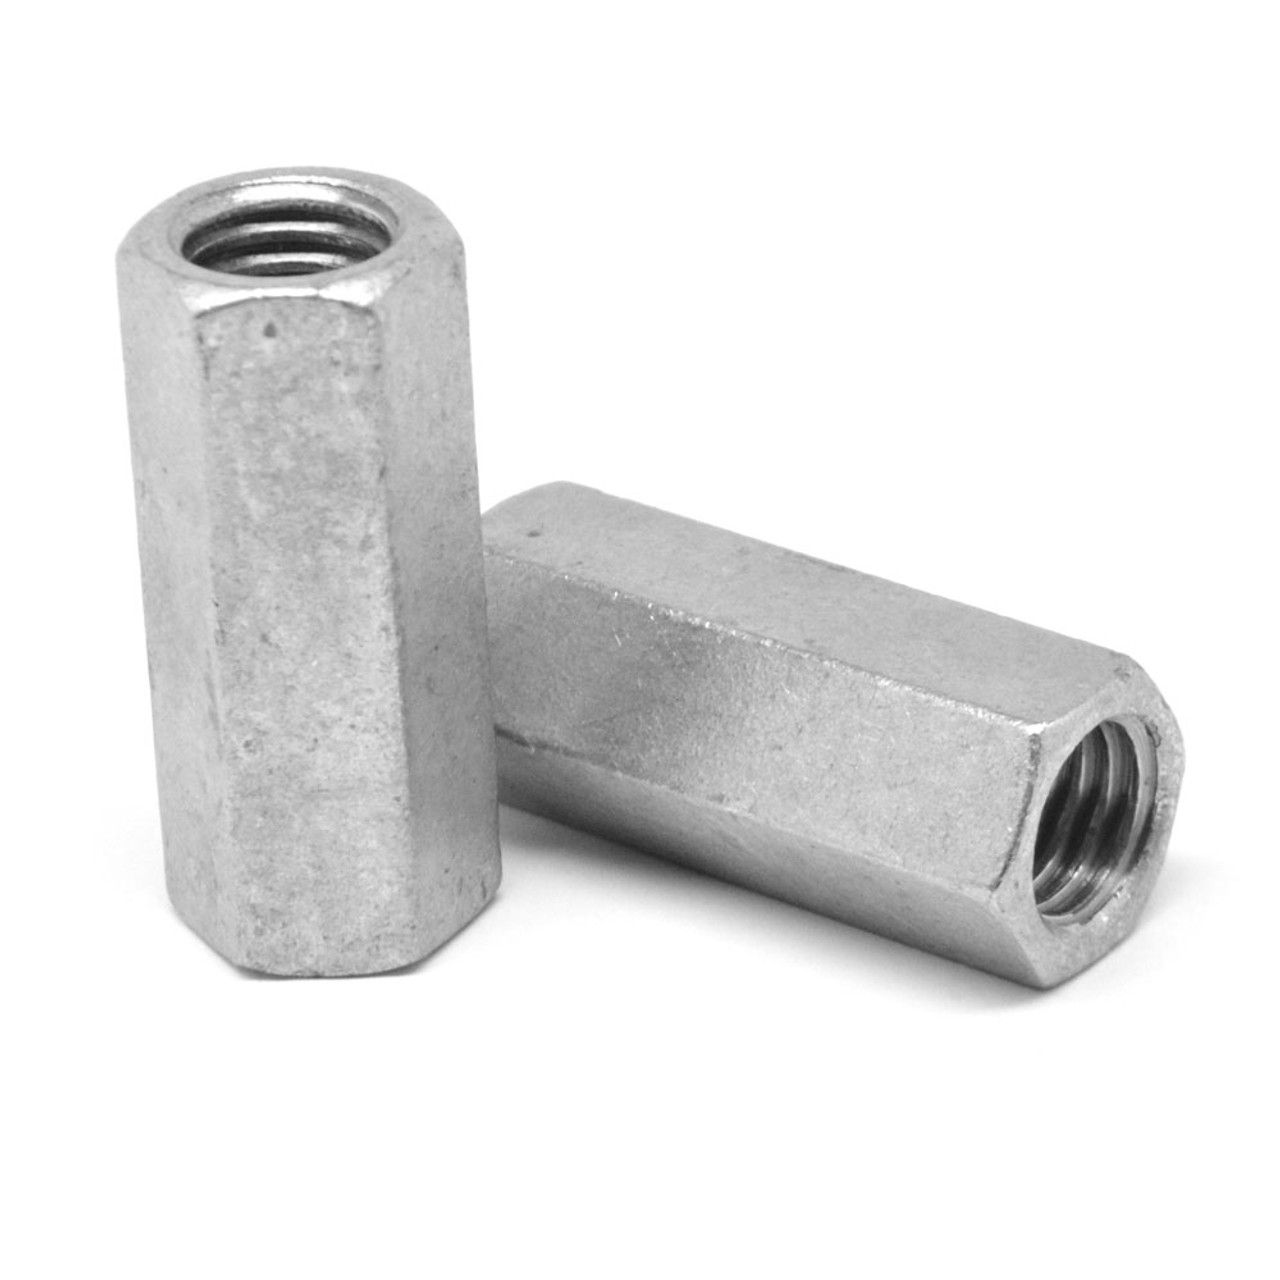 1"-8 x W1 3/8" x L2 3/4" Coarse Thread A563 Grade A Hex Rod Coupling Nut Low Carbon Steel Hot Dip Galvanized